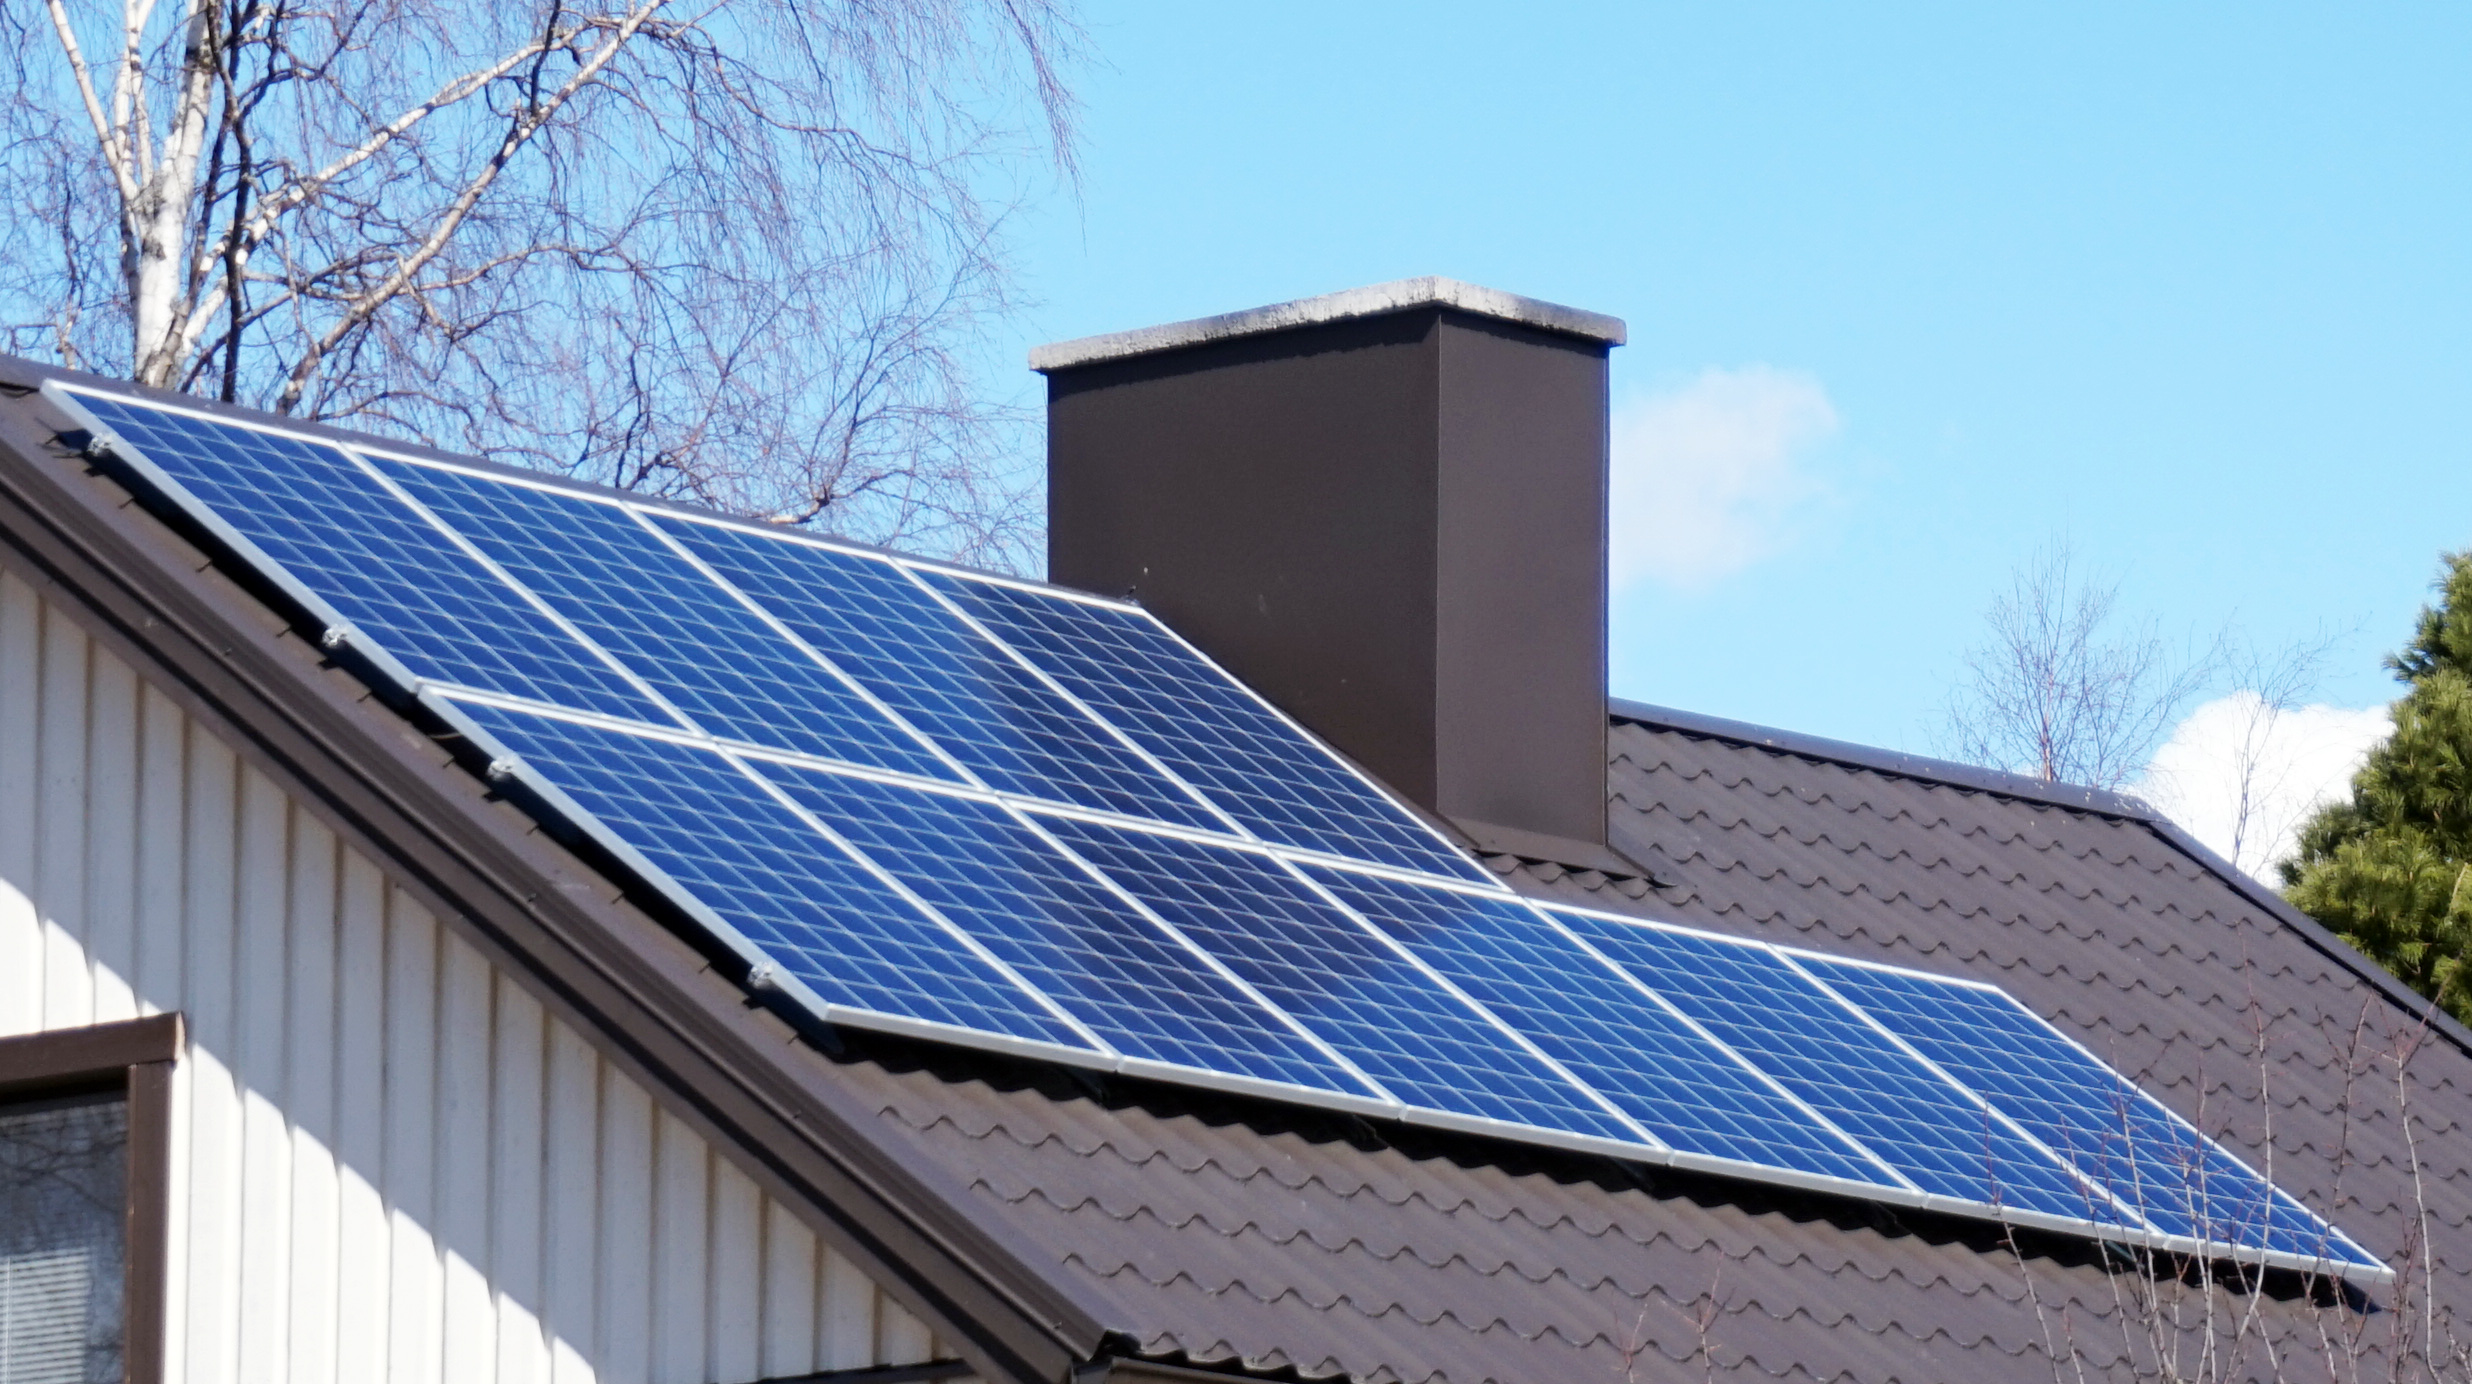 Here Are Some Tips To Optimize Power From Your Solar Panels